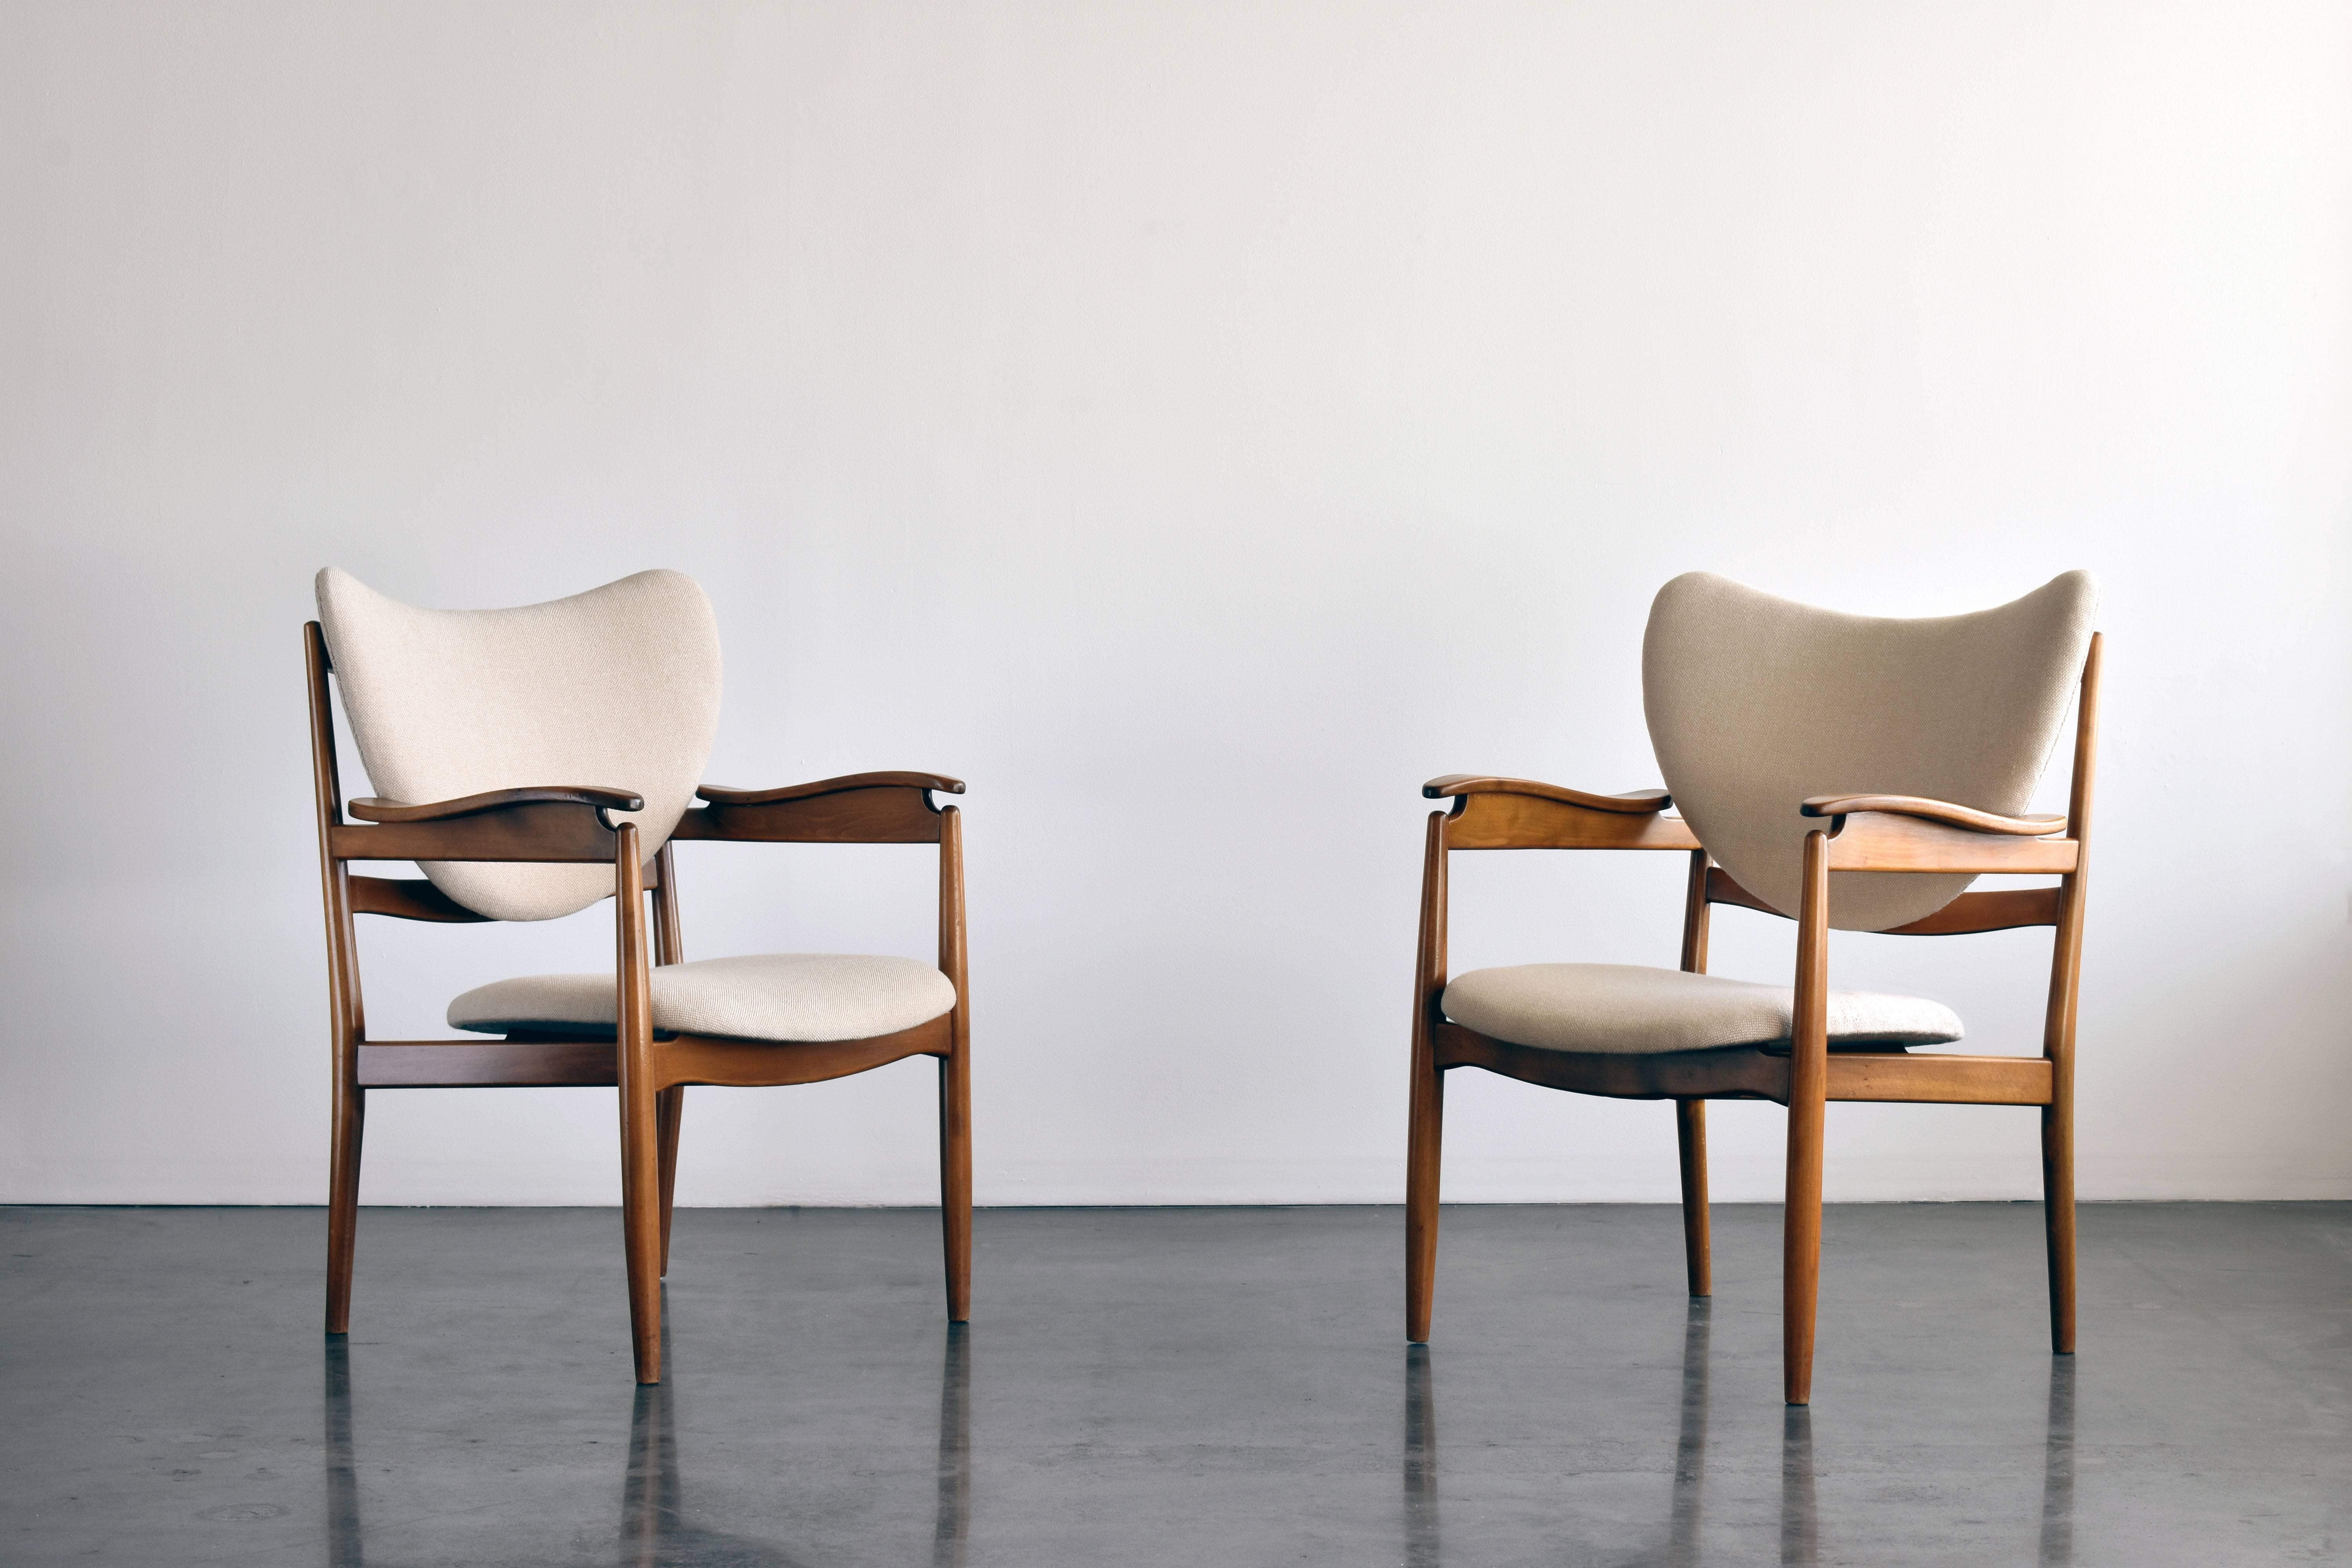 A pair of organic armchairs. Brand new fabric sourced and upholstered in Scandinavia beech frames.

In 1949, the year Finn Juhl designed the seminal chieftain chair, he also designed this less known chair for manufacturer Søren Willadsen.